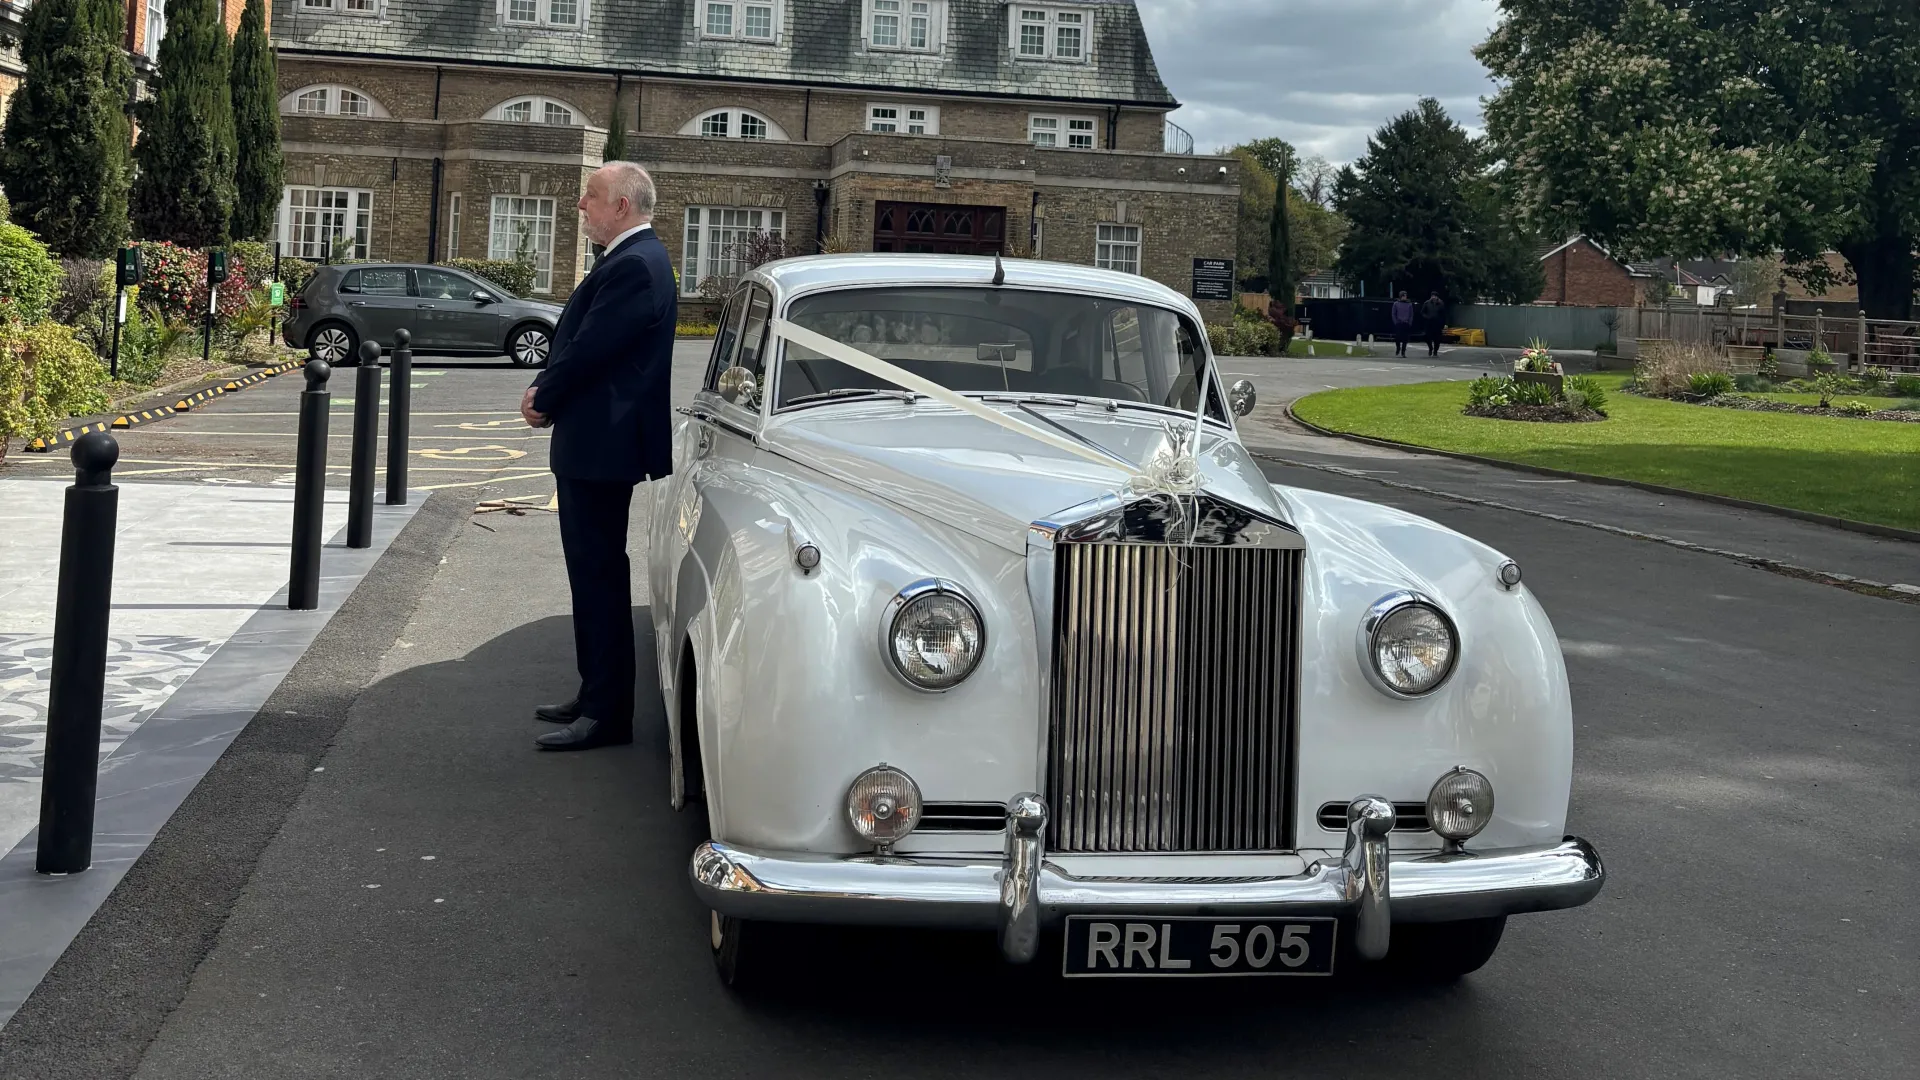 Classic Rolls-Royce silver Cloud with chauffeur waiting next to the vehicle